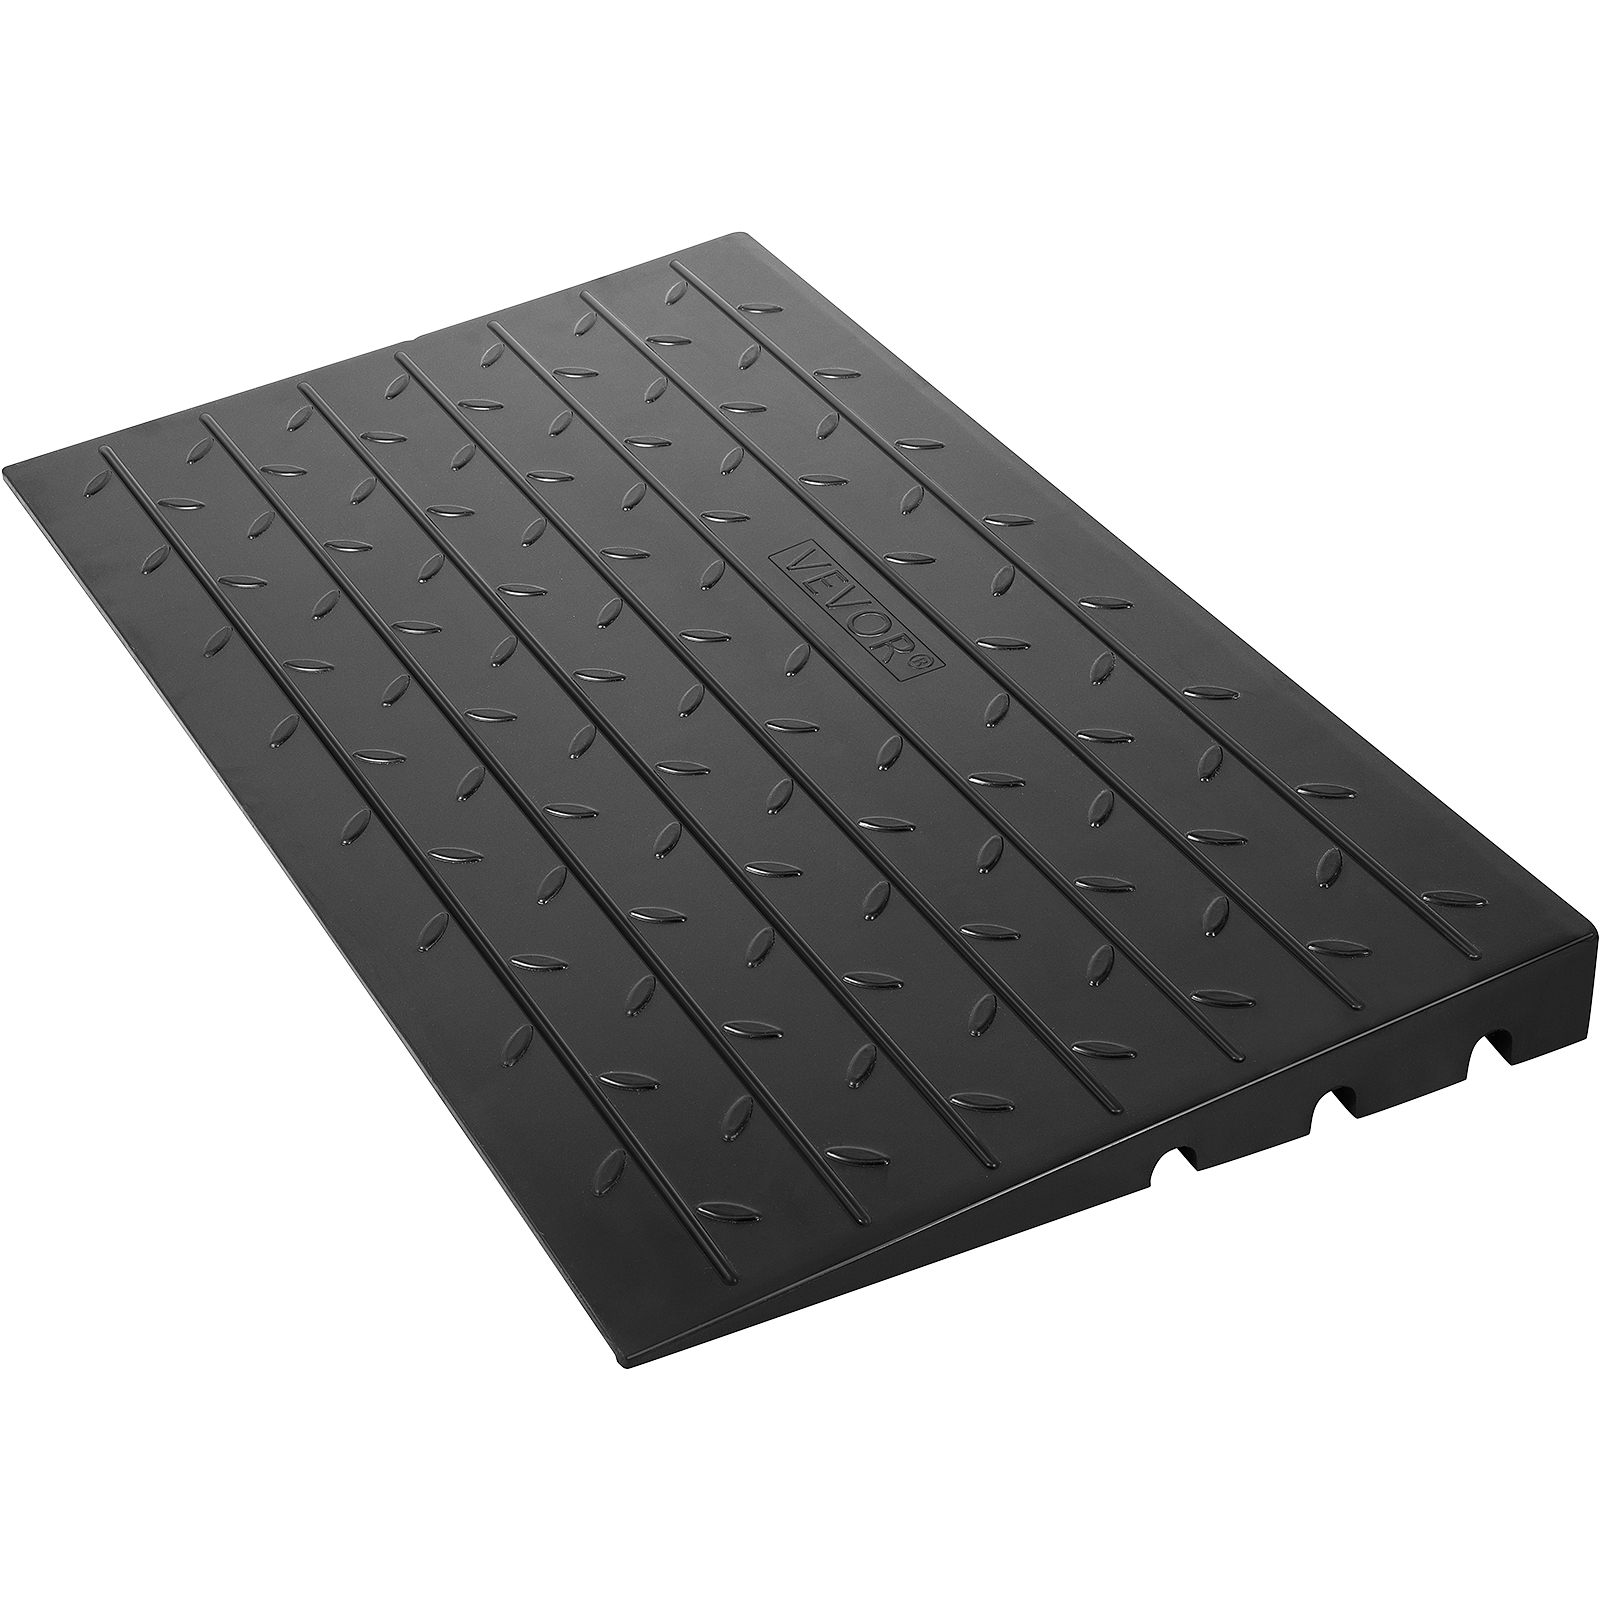 VEVOR Rubber Kerb Ramp Rubber Threshold Ramp 65mmH 1t Load Wheelchair Access от Vevor Many GEOs